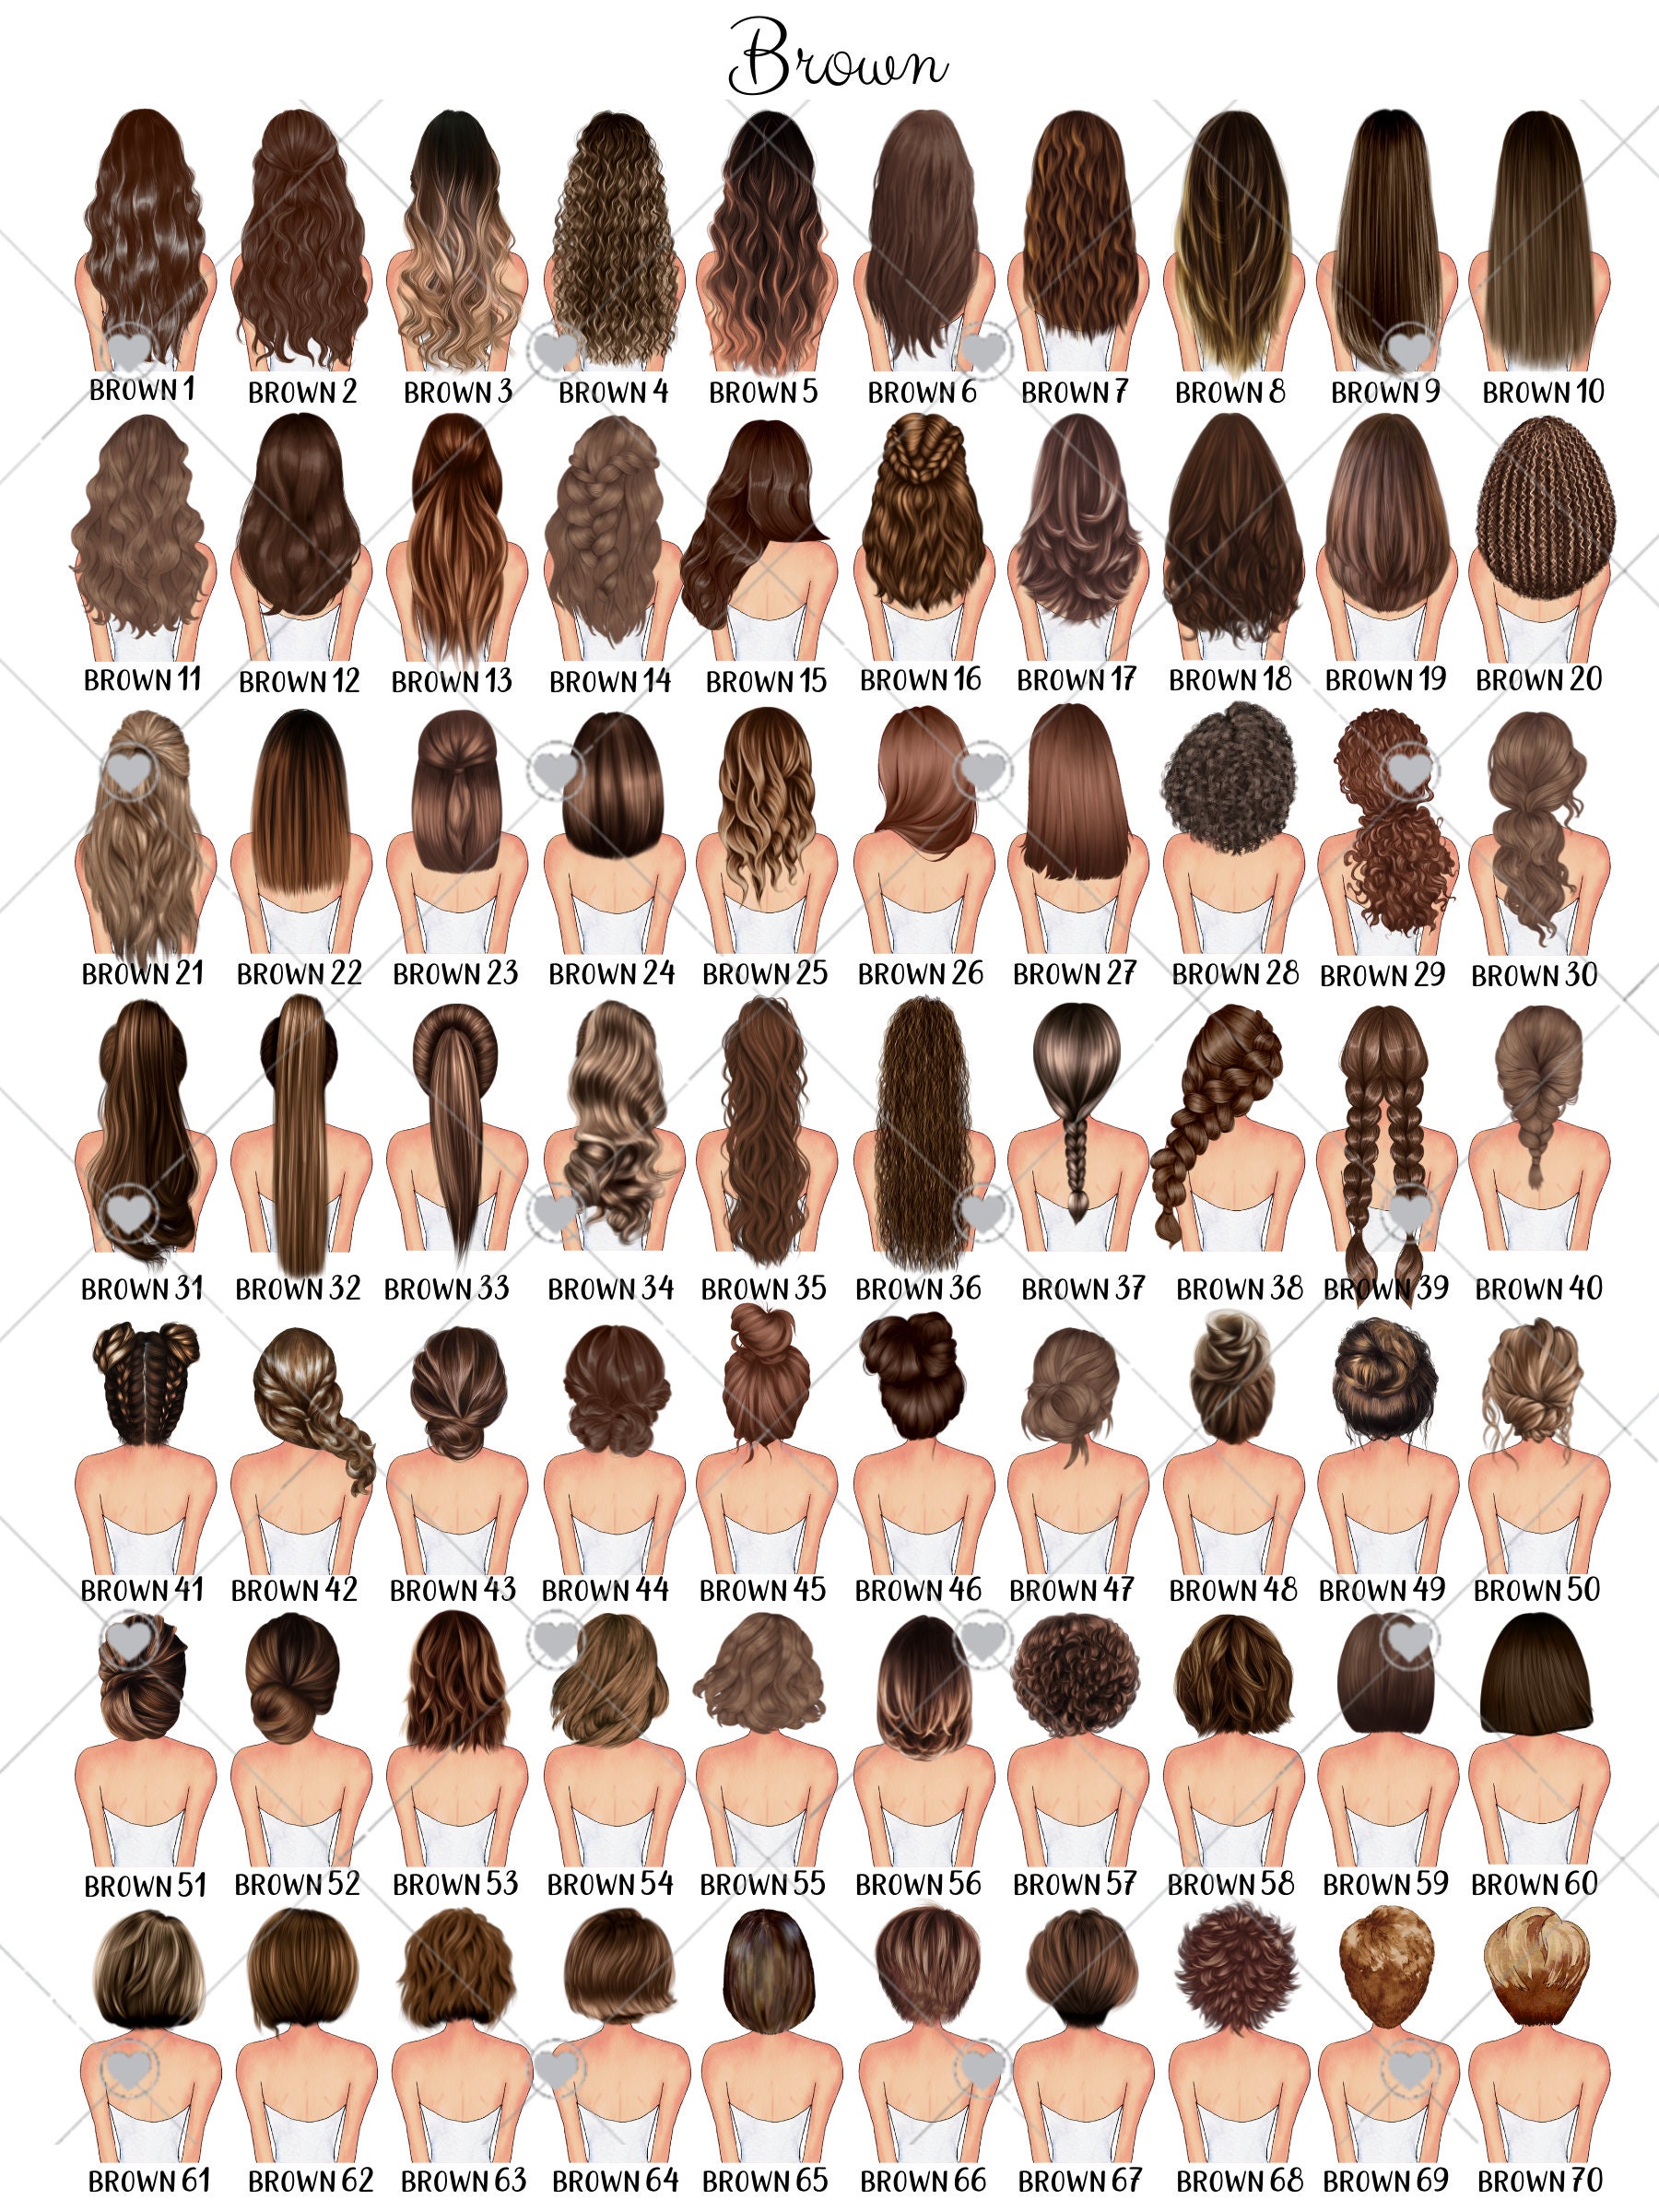 Color Chart Hairdresser Hair Color Palette Stock Photo 1984498946